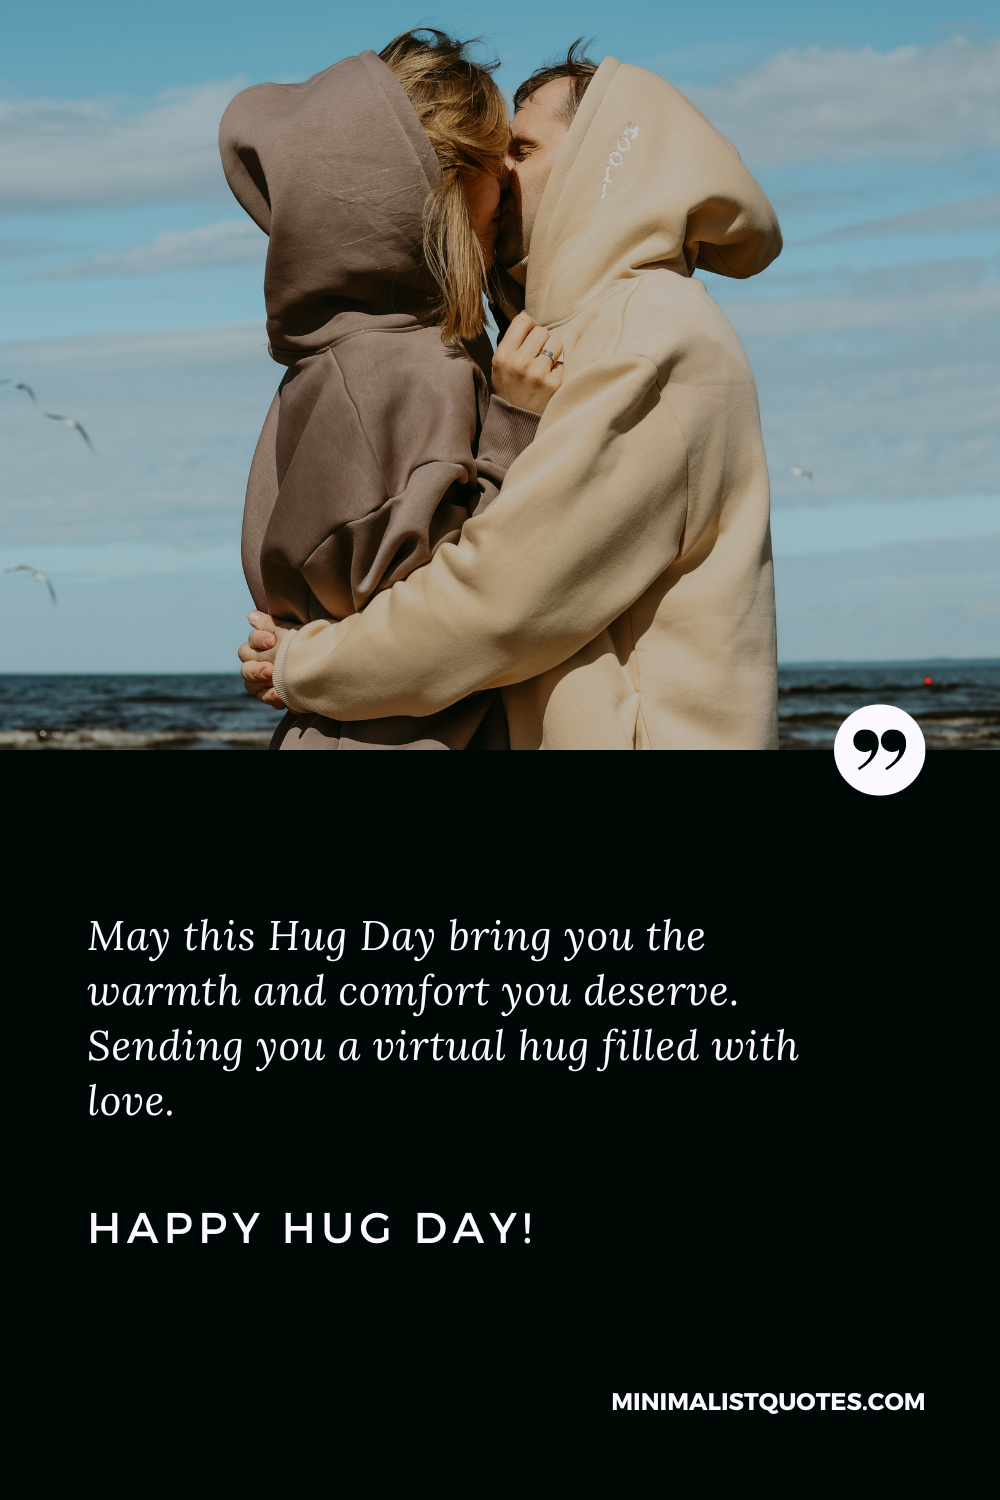 May this Hug Day bring you the warmth and comfort you deserve. Sending you a  virtual hug filled with love. Happy Hug Day!